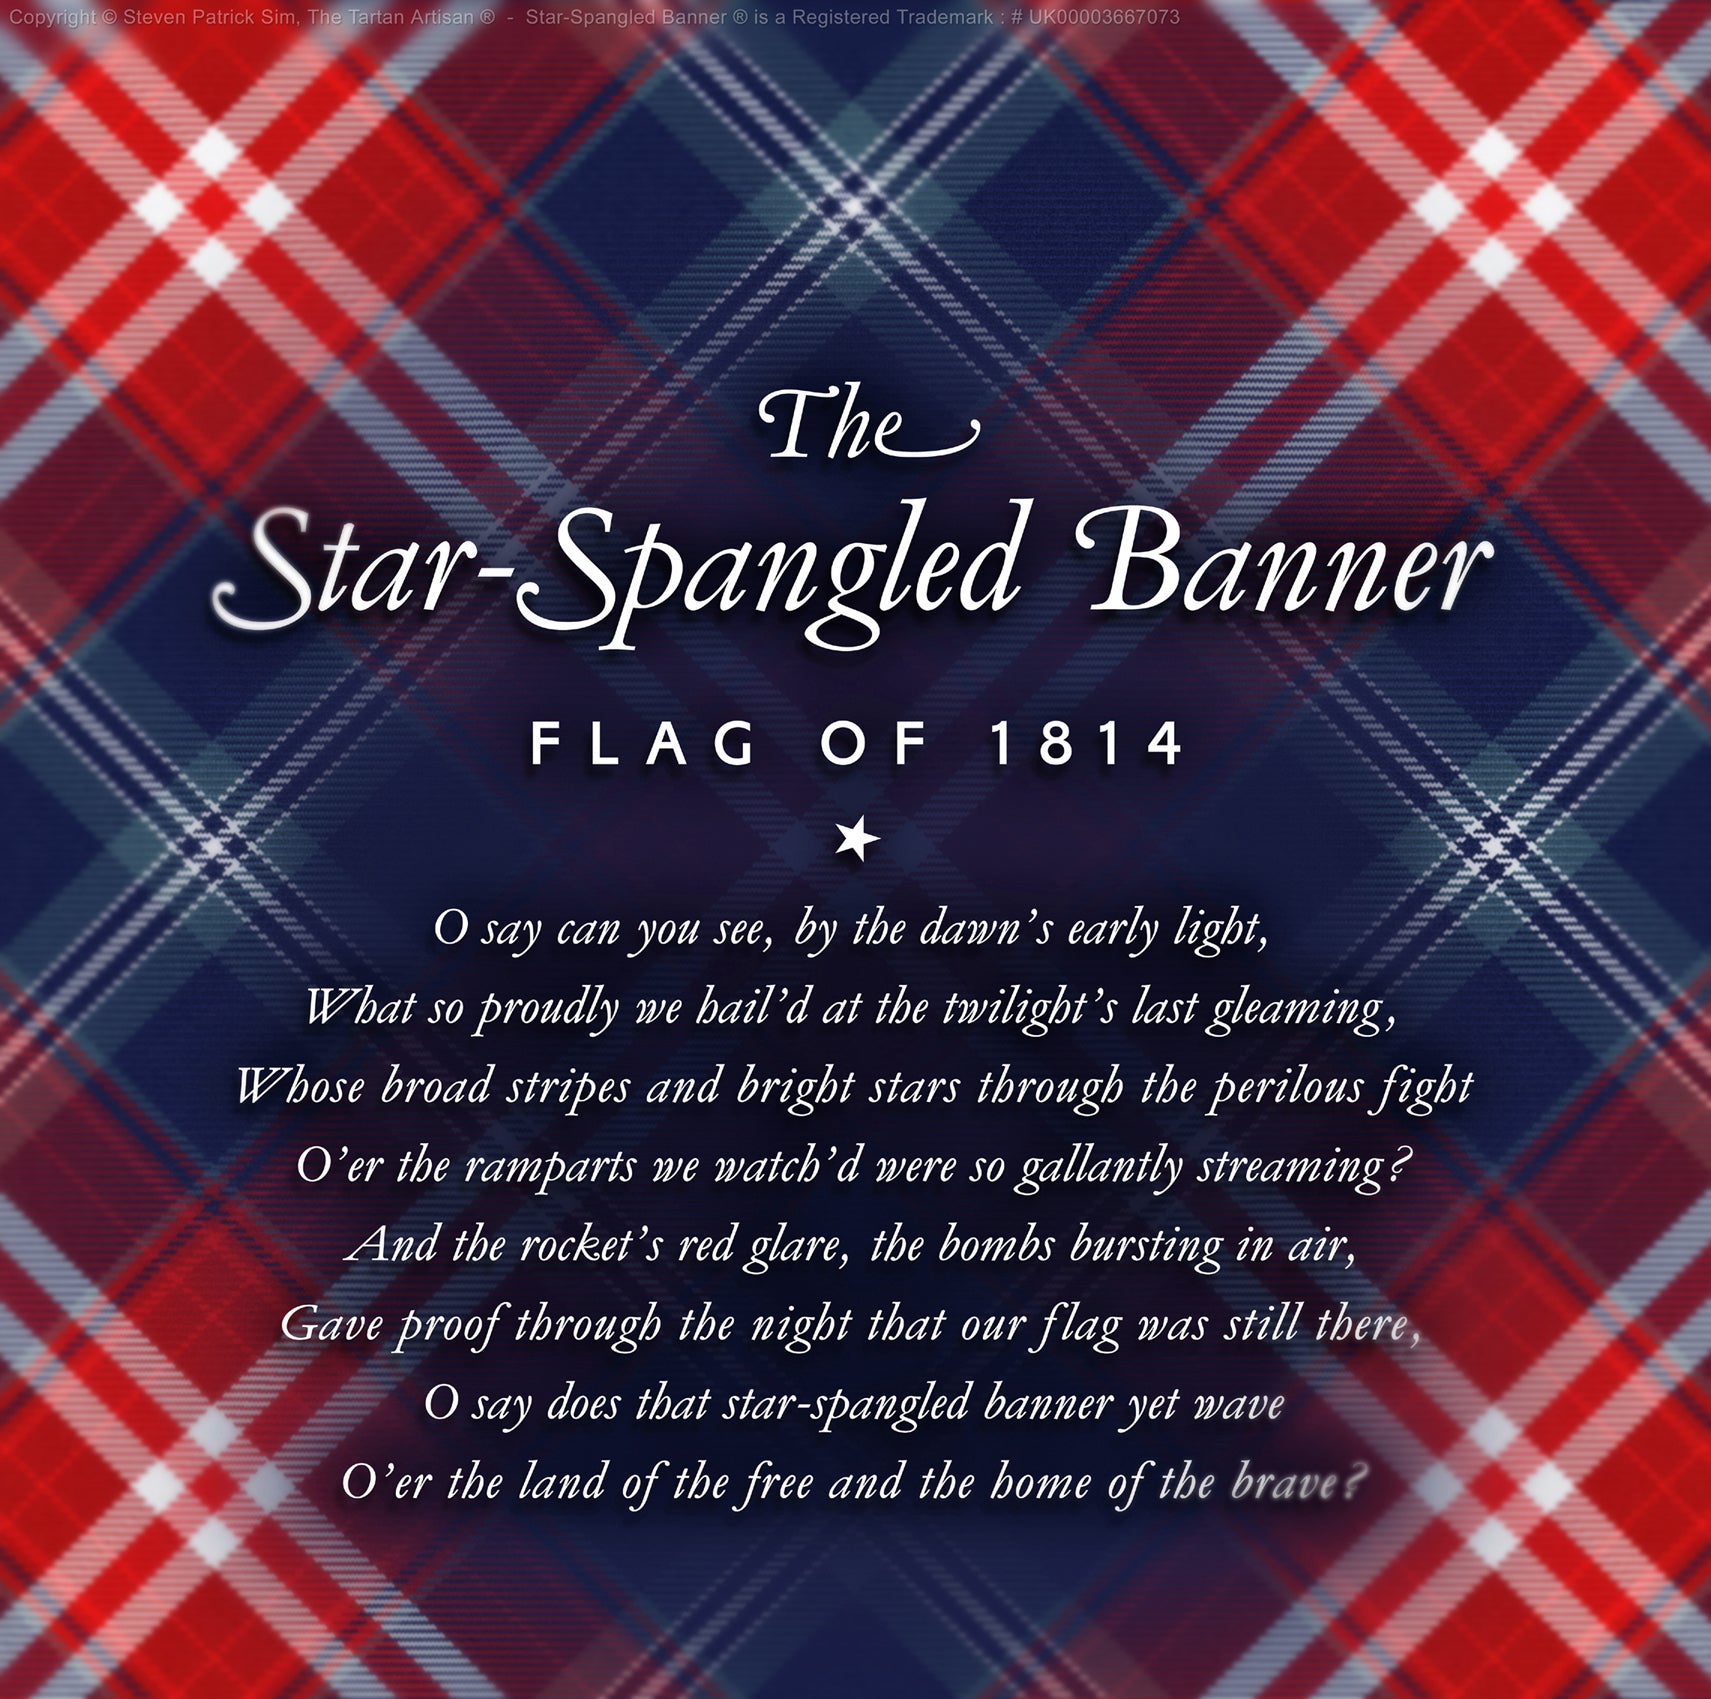 The Barn Pottery - Lyrics to “The Star-Spangled Banner”,”You're a